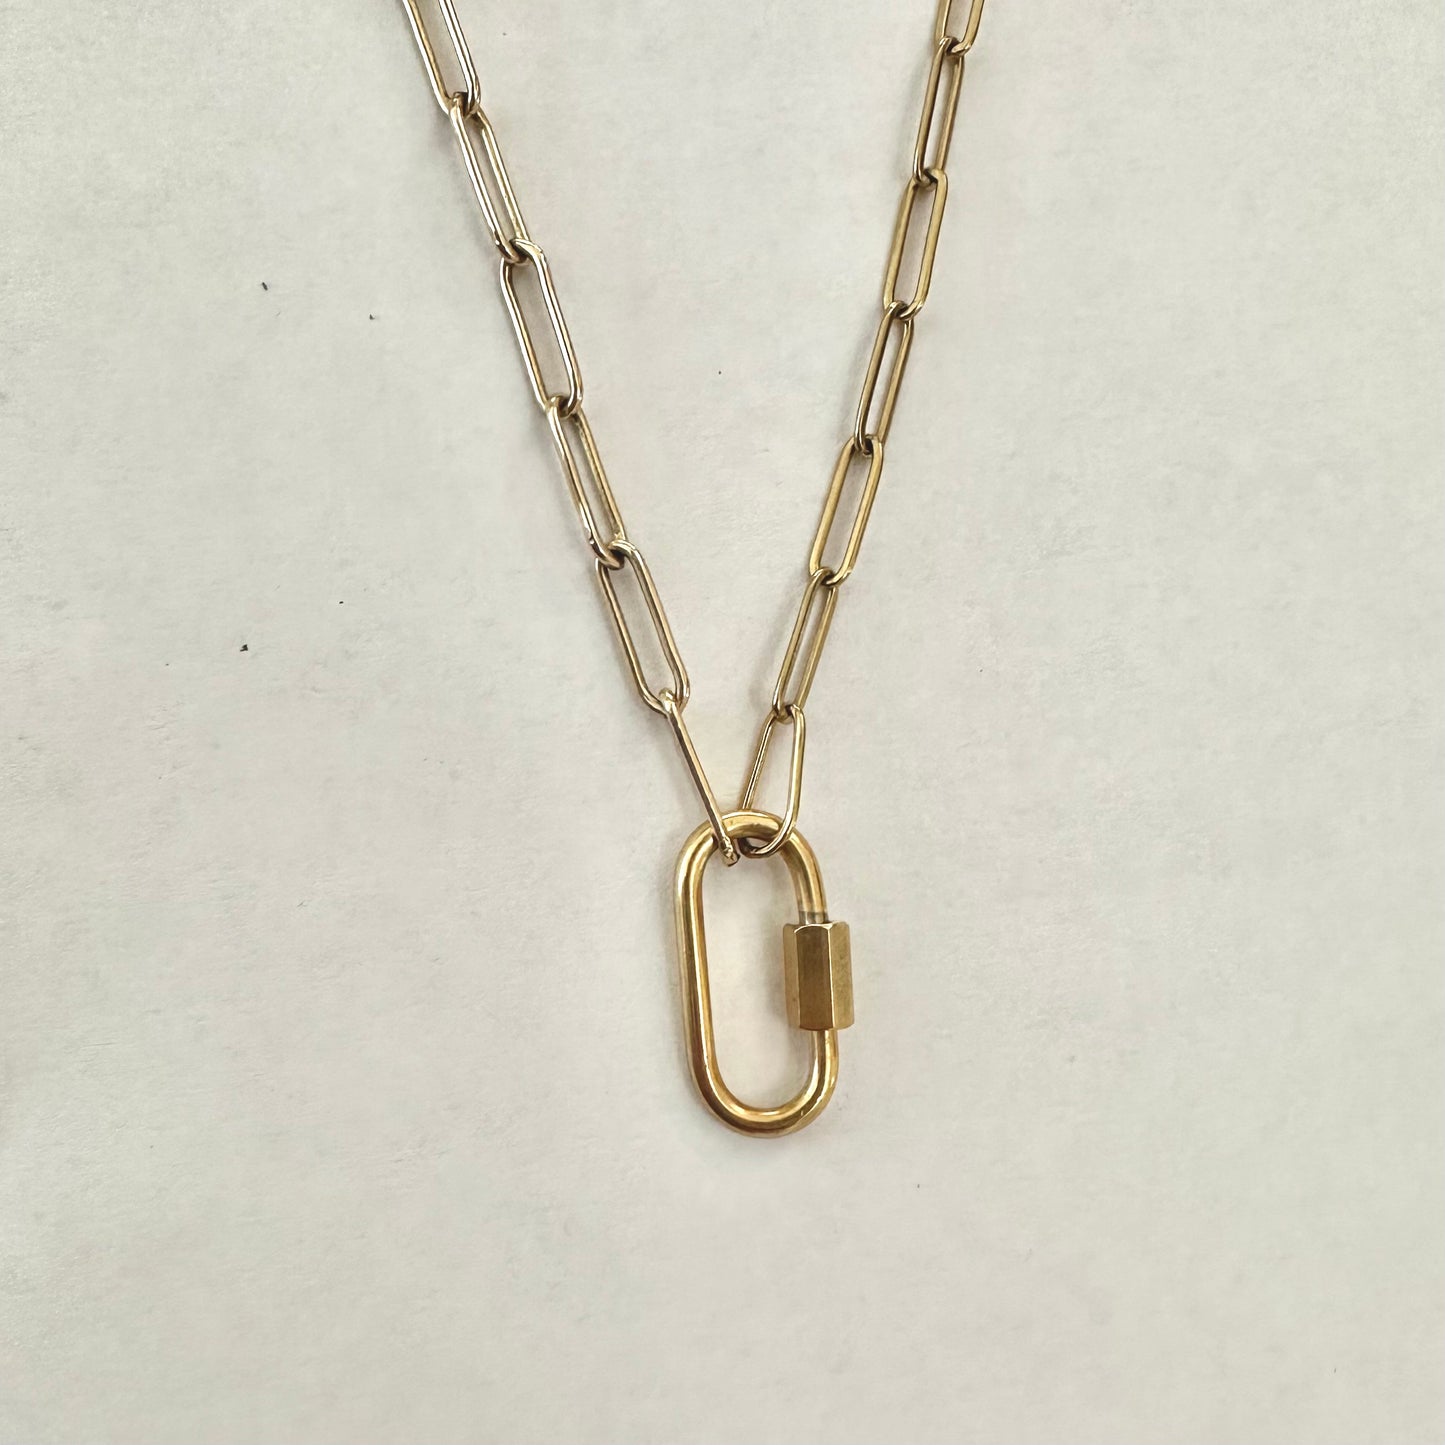 Chain / Locking Paperclip